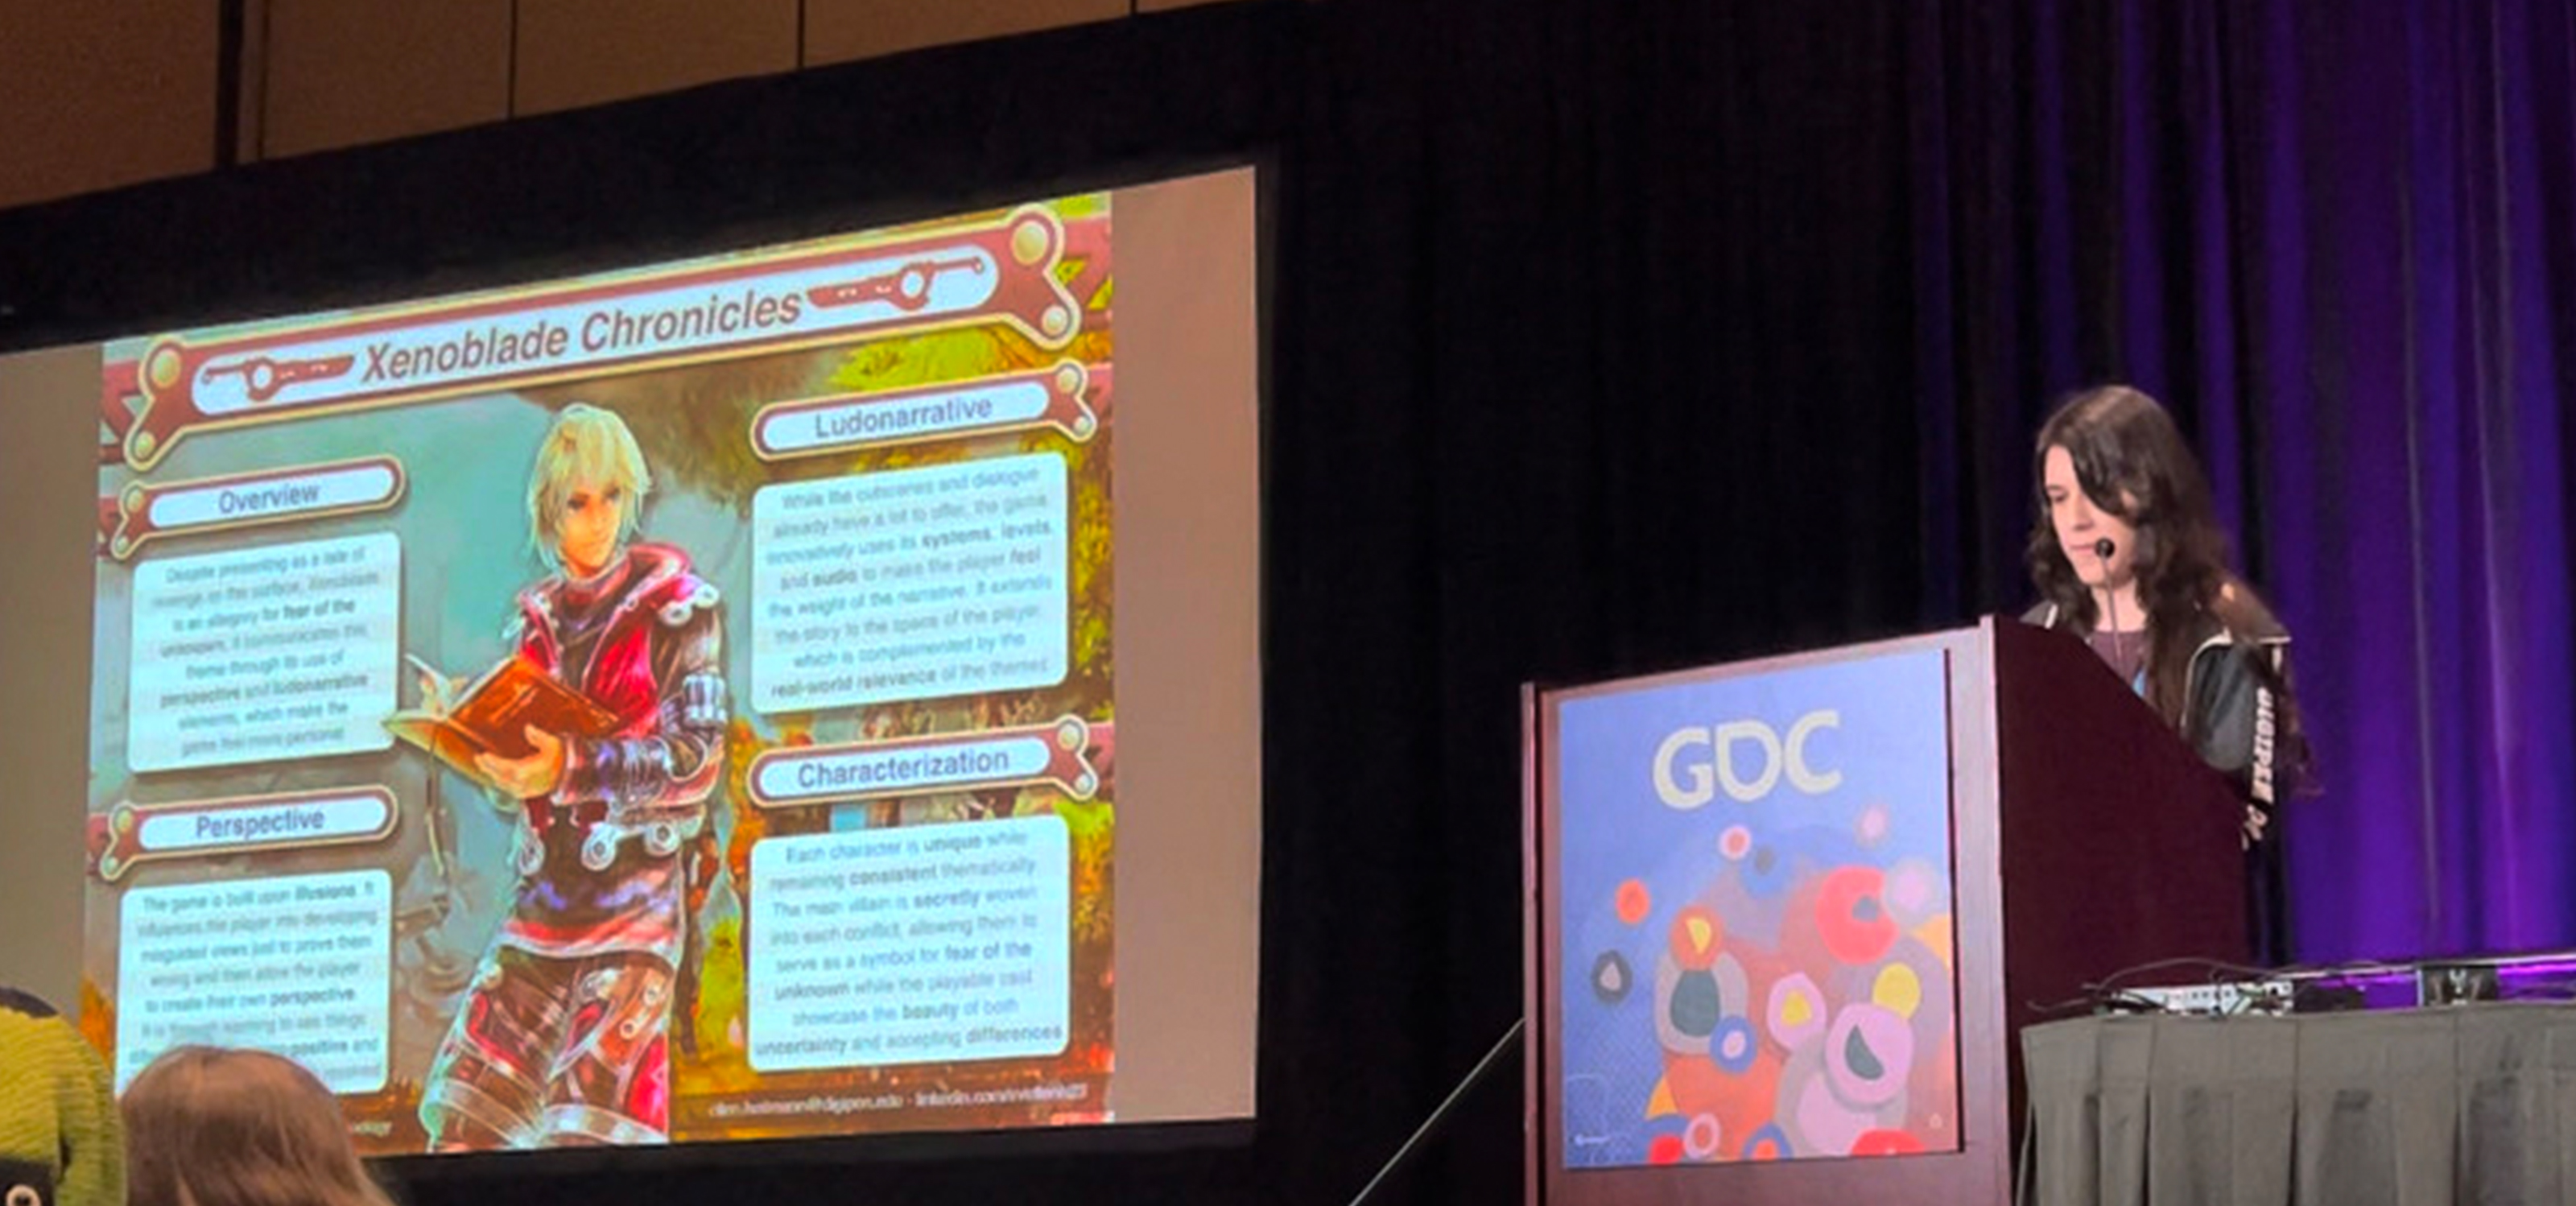 Ellen Heitmann presents her narrative analysis on Xenoblade Chronicles on stage at the GDC Game Narrative Summit.